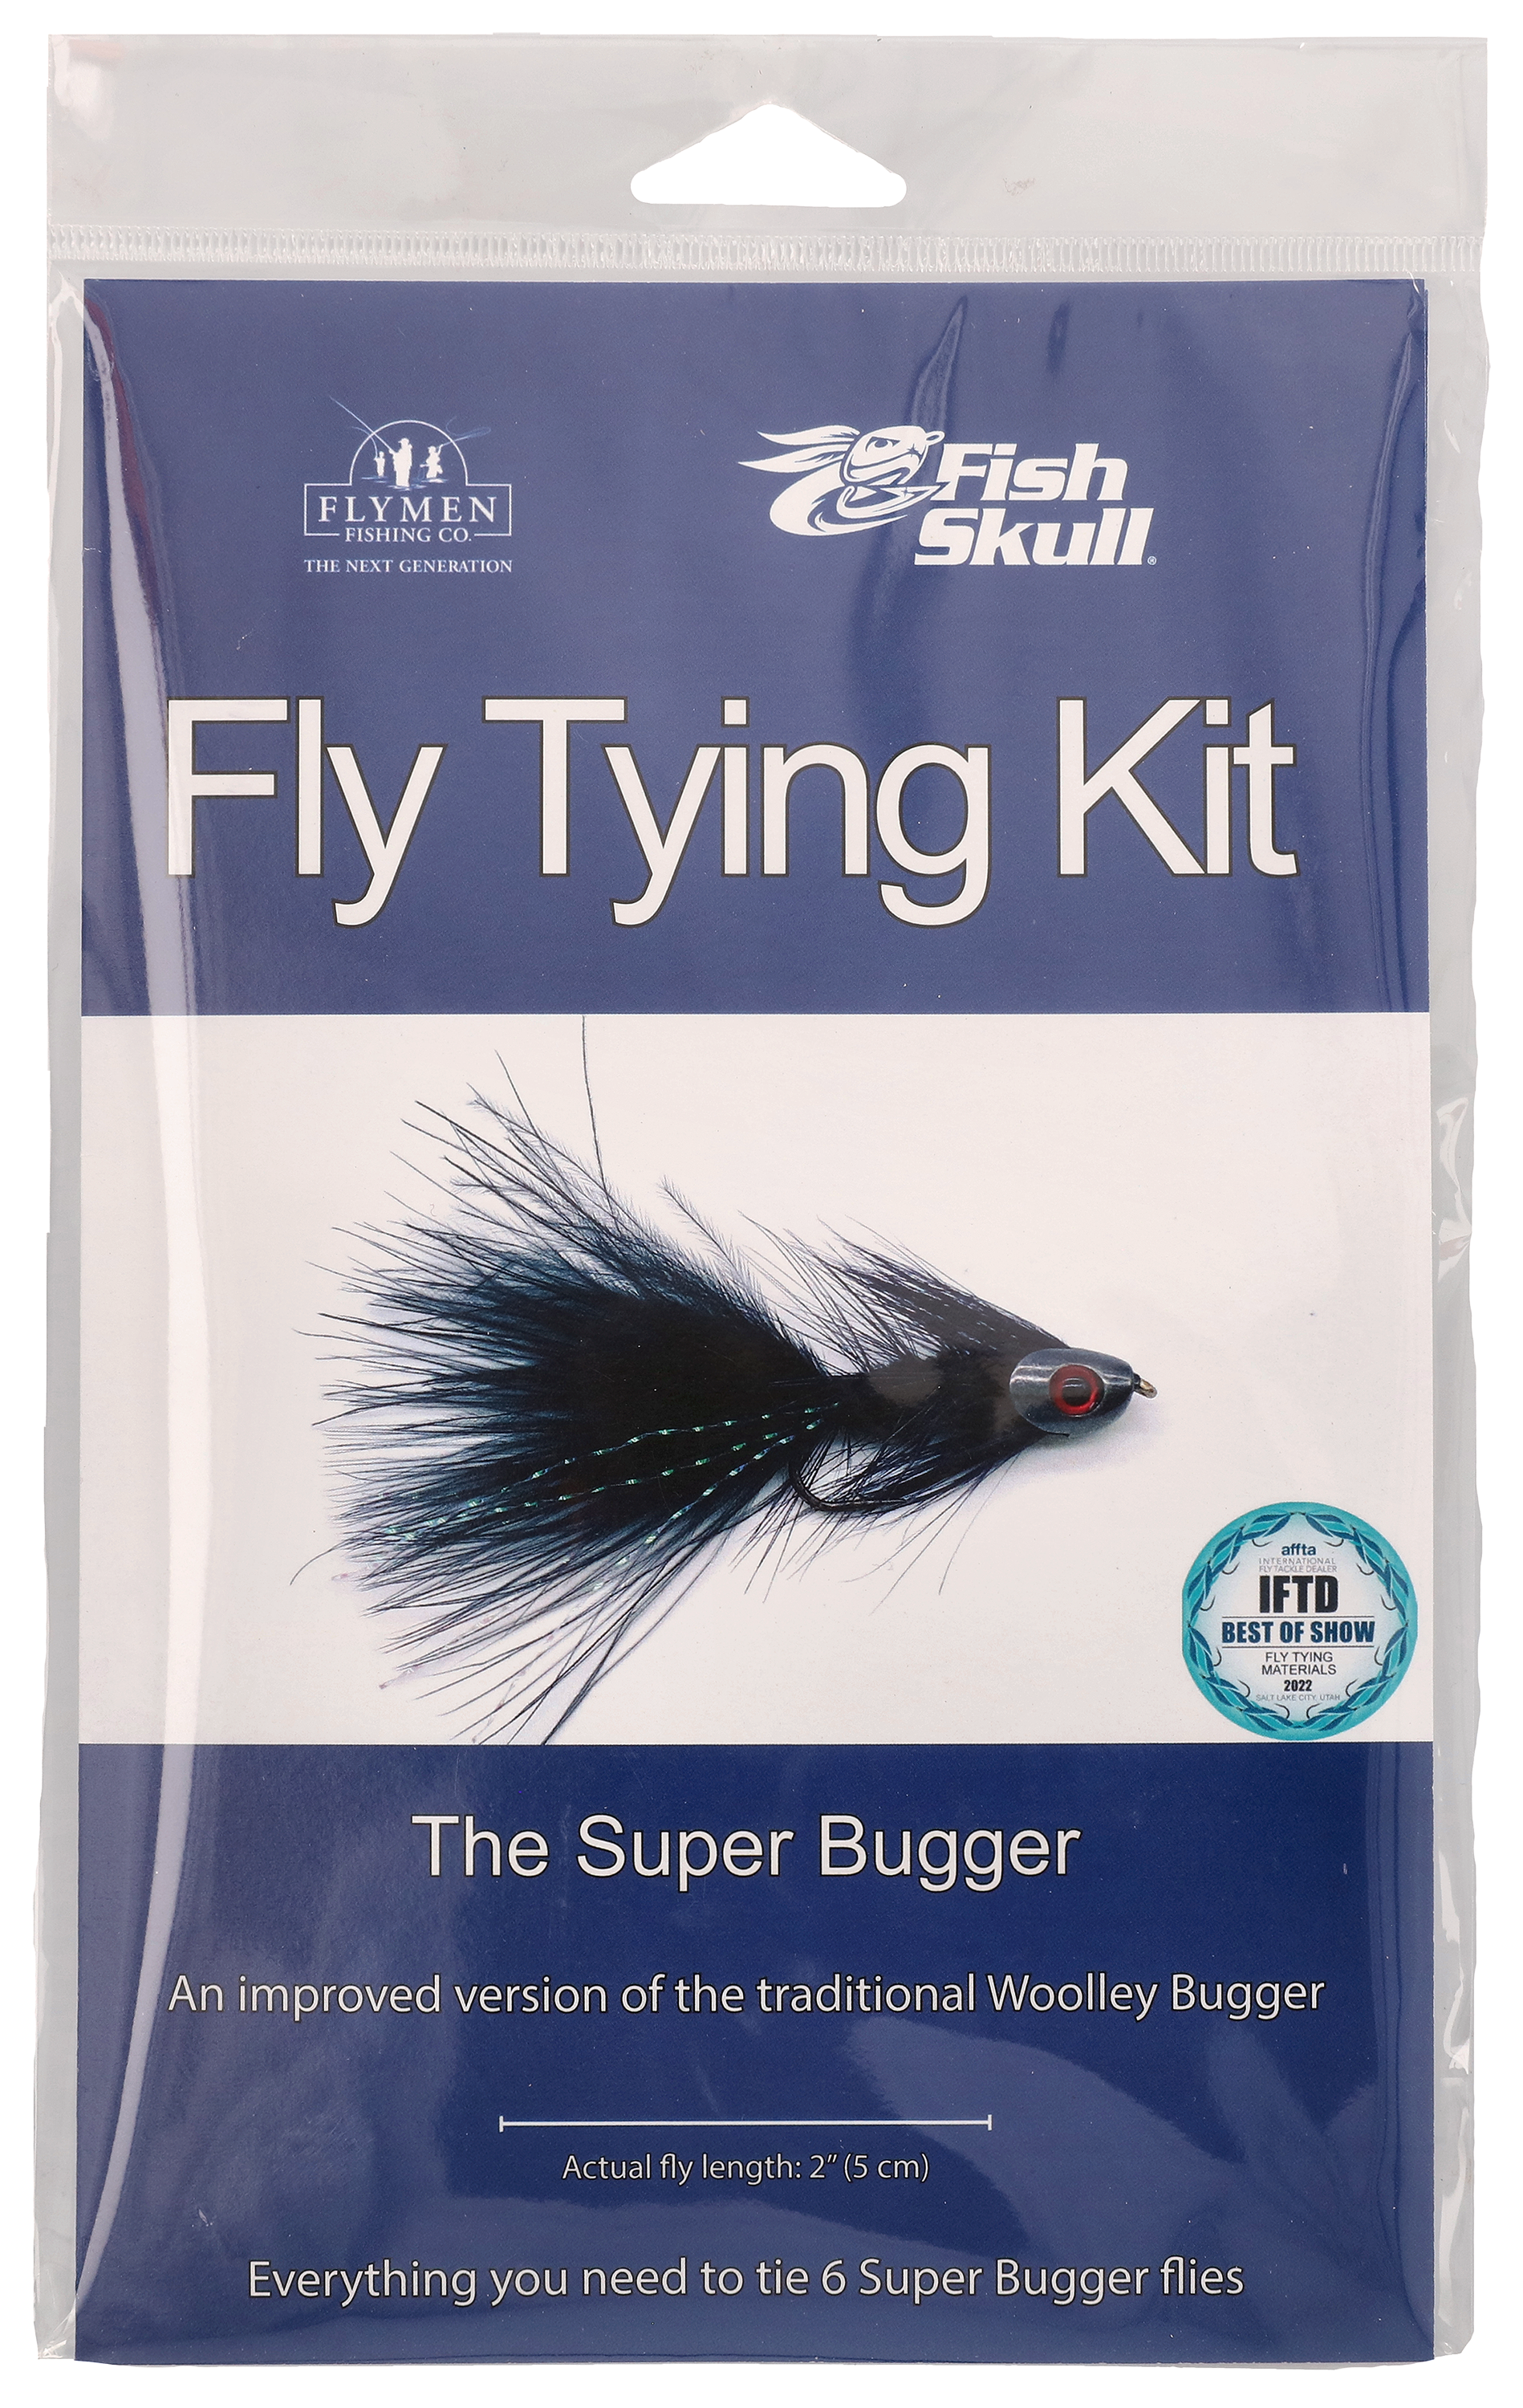 Flymen Fishing Company Panfish and Topwater Trout Popper Fly Tying Kit